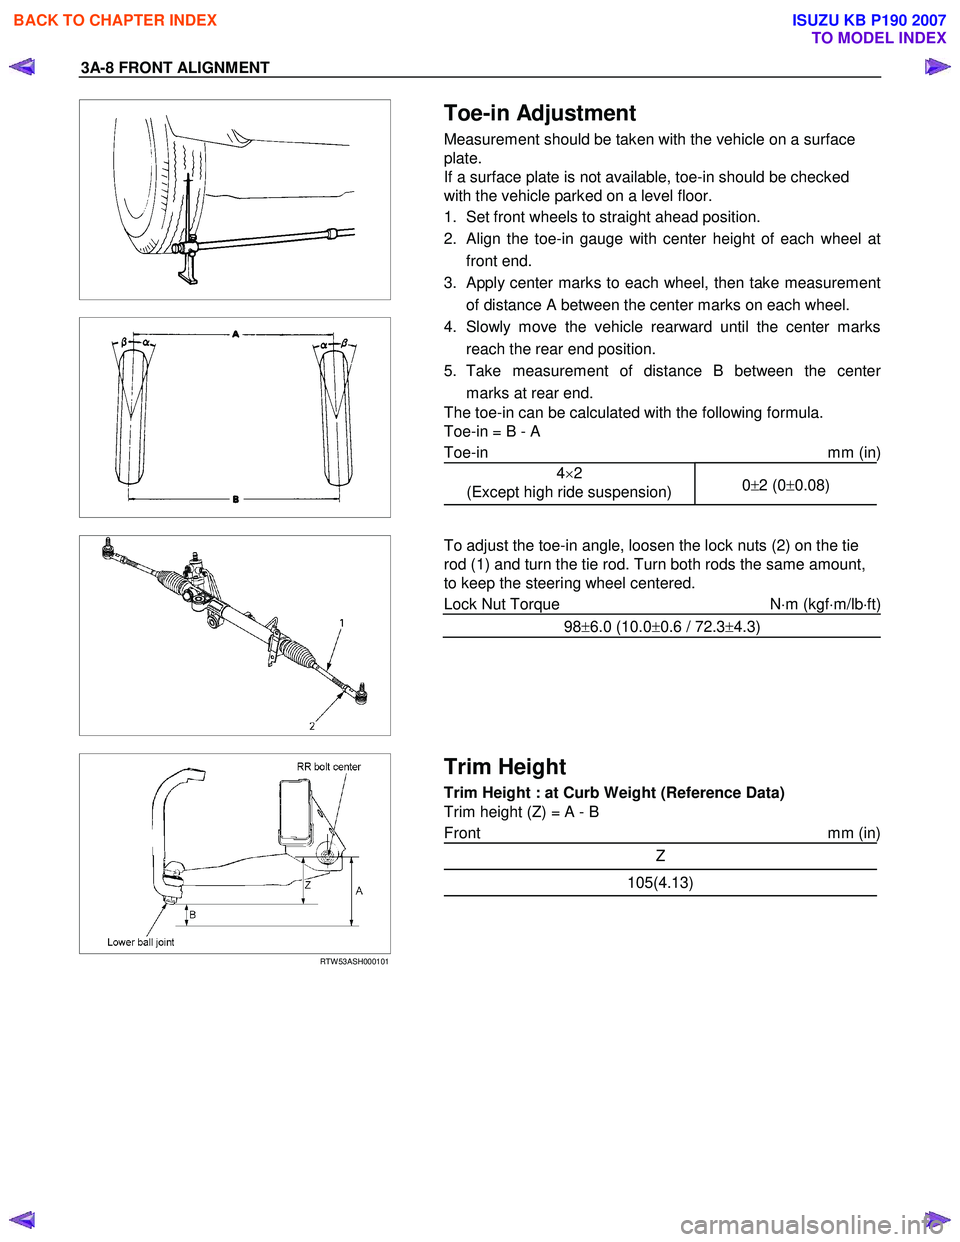 ISUZU KB P190 2007  Workshop User Guide 3A-8 FRONT ALIGNMENT 
 
  
 
  
 Toe-in Adjustment 
Measurement should be taken with the vehicle on a surface  
plate. 
If a surface plate is not available, toe-in should be checked 
with the vehicle 